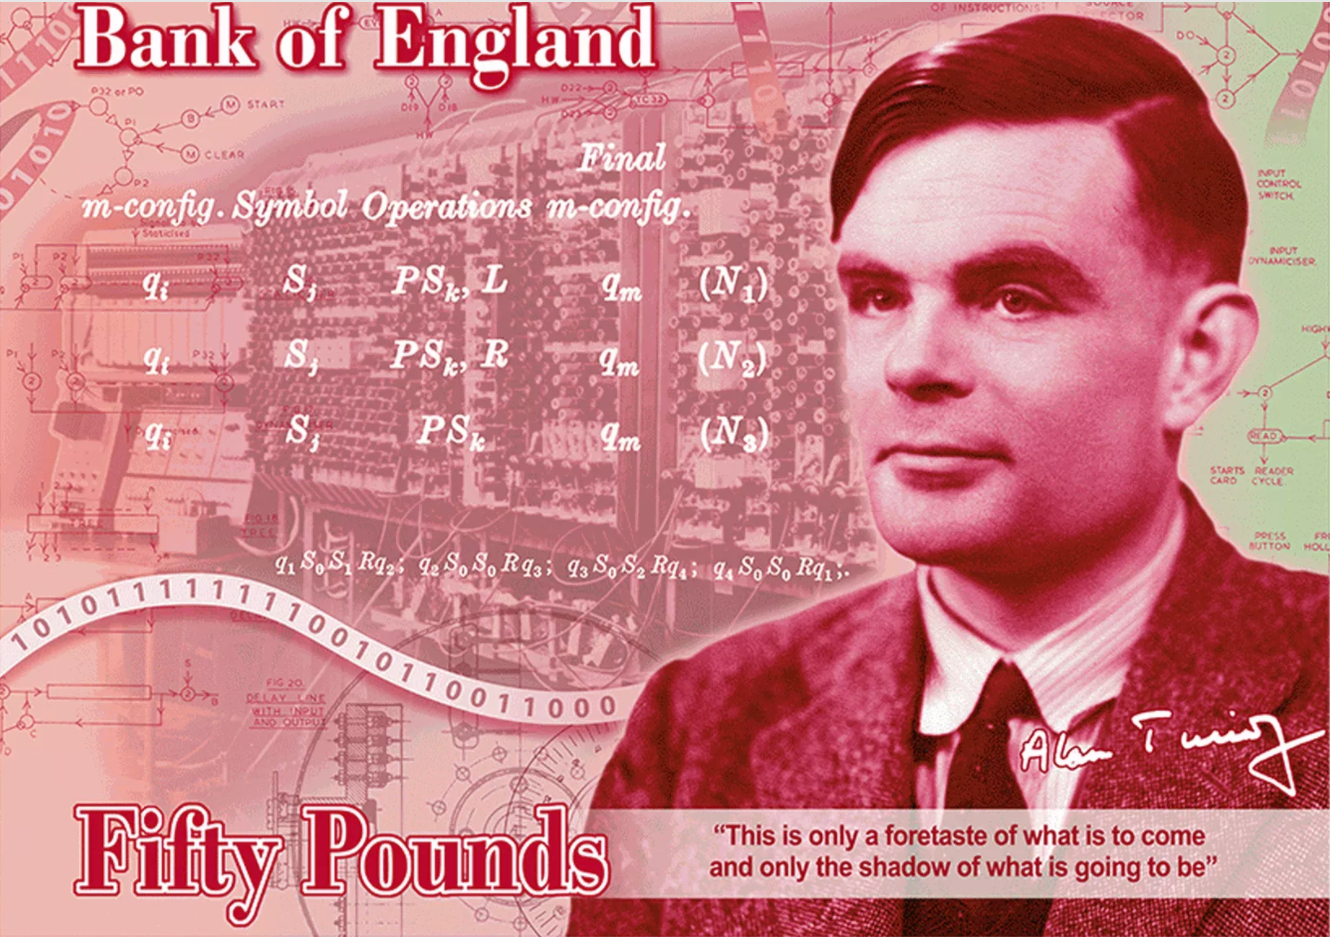 A Bank of England note featuring Bletchley Park Codebreaker Alan Turing